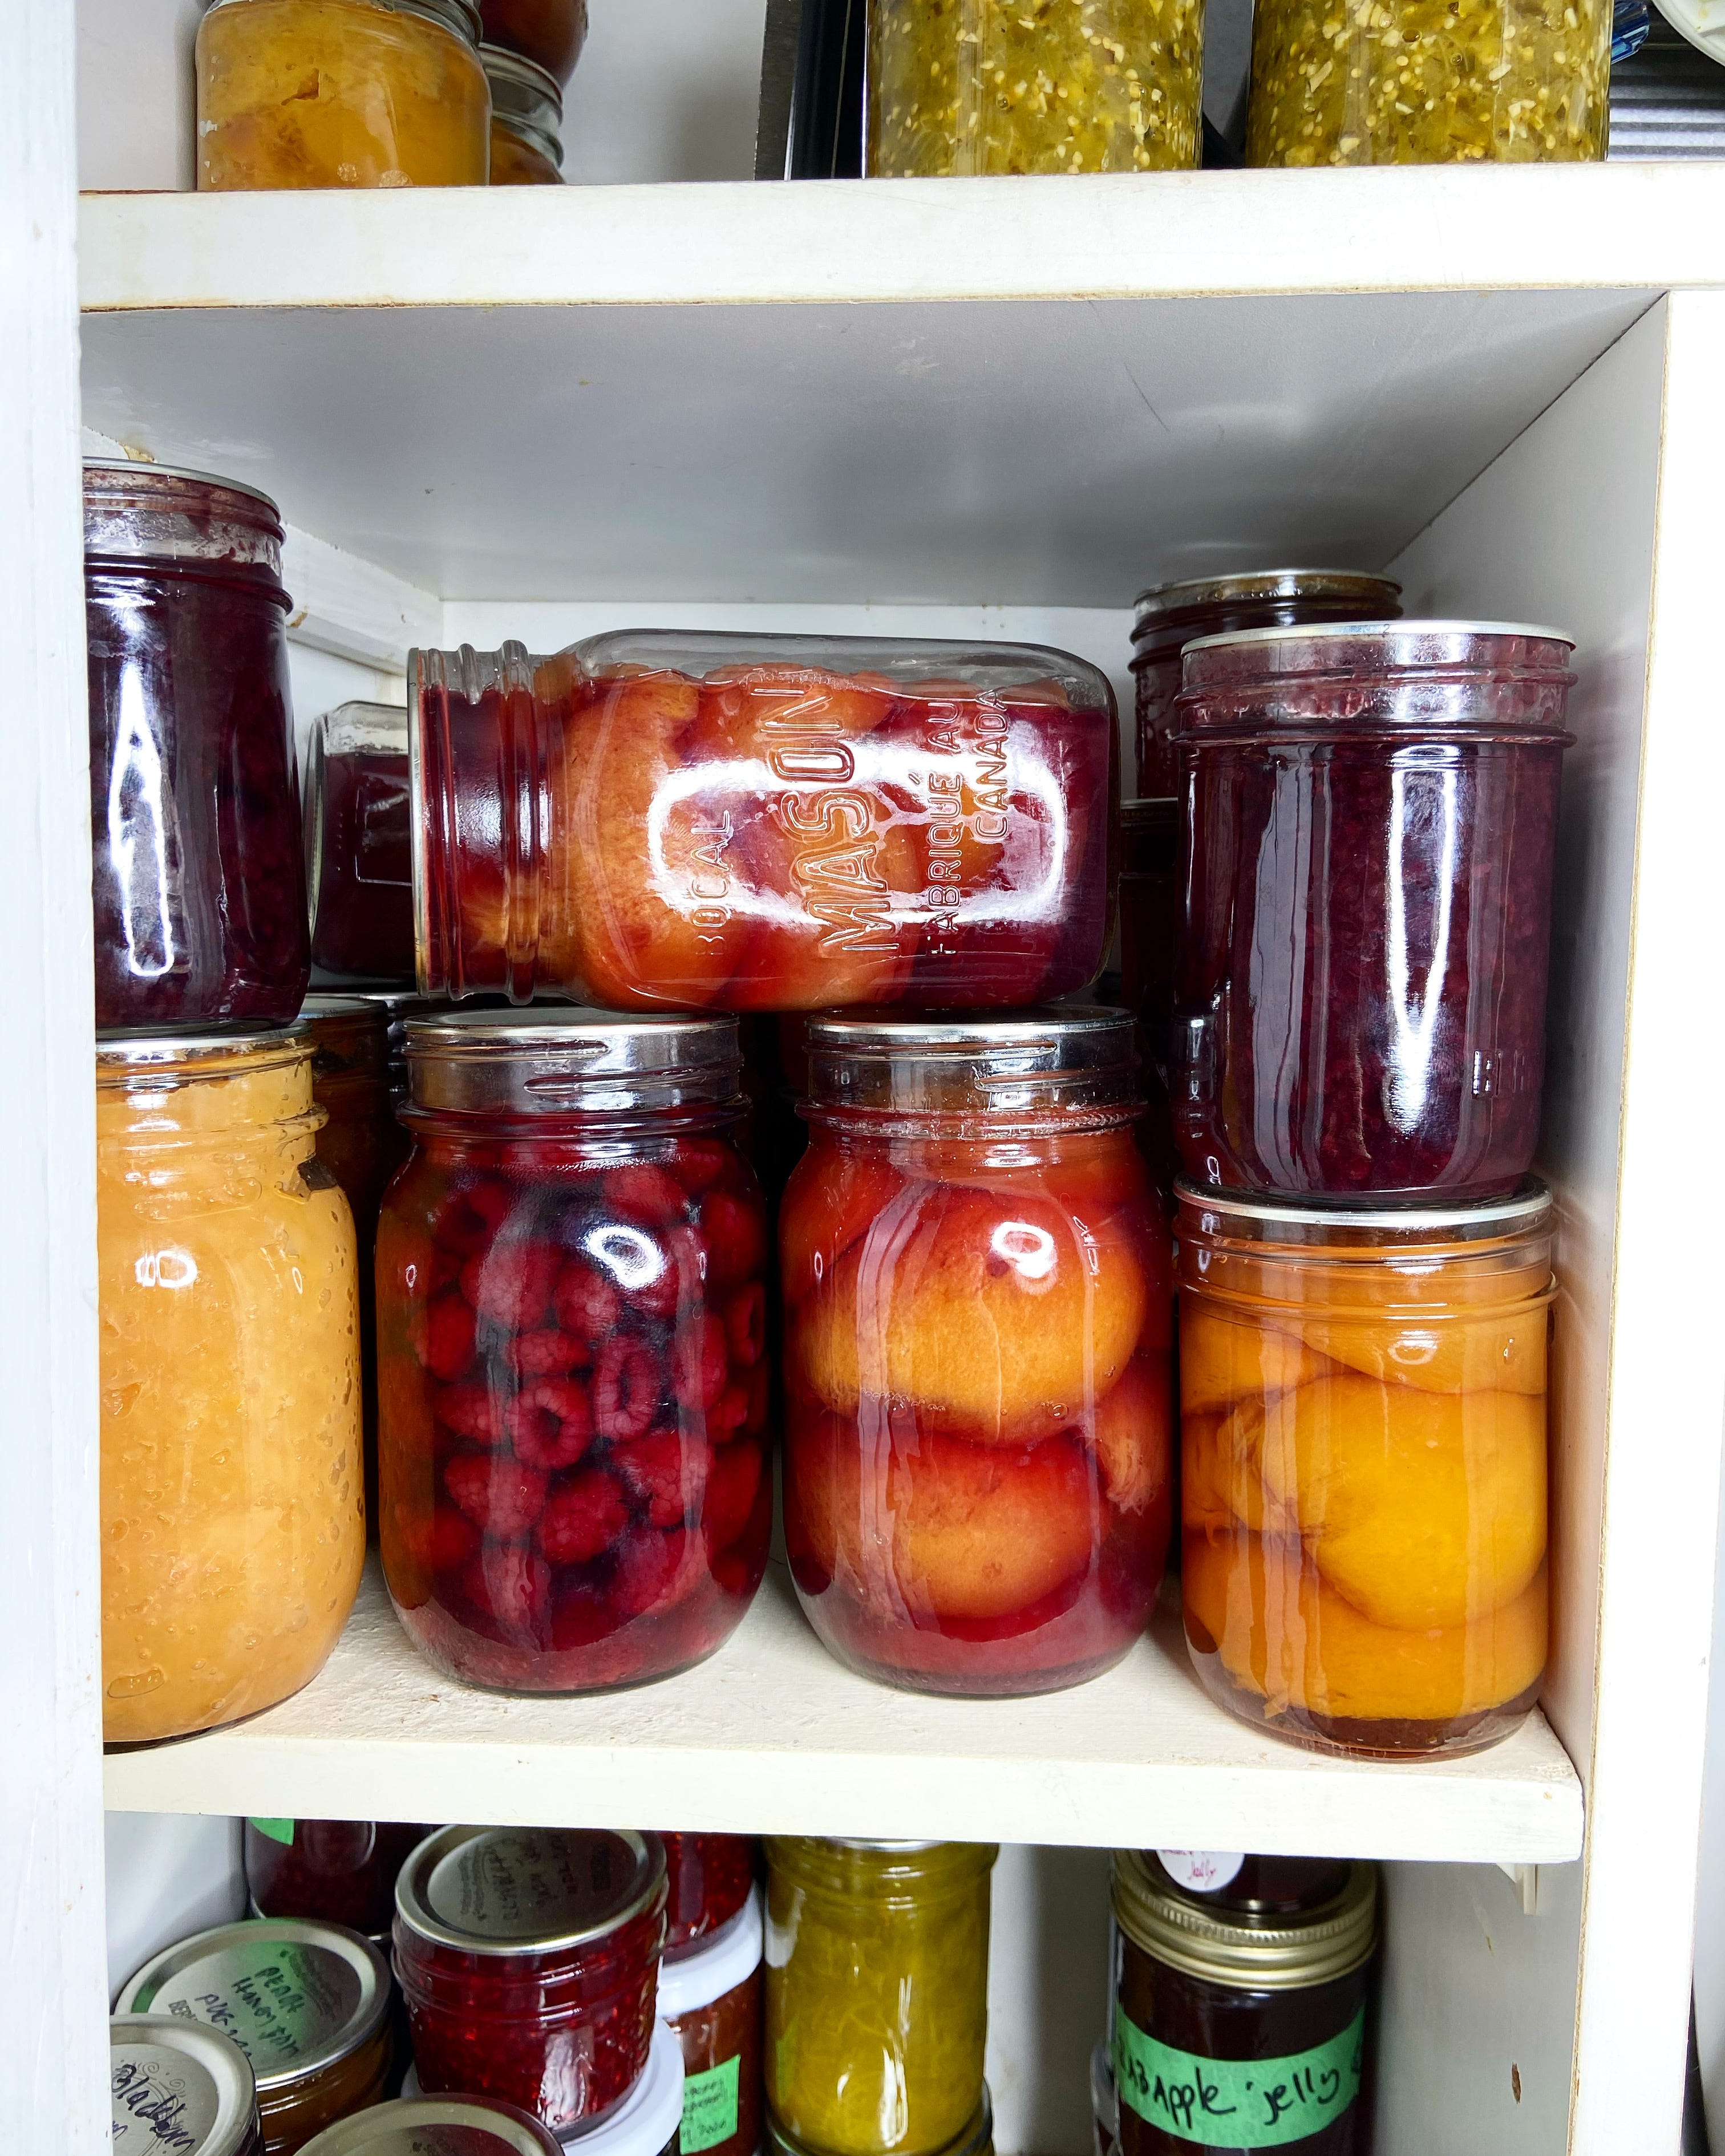 Best Canning and Food Preservation Equipment for Preserving Local